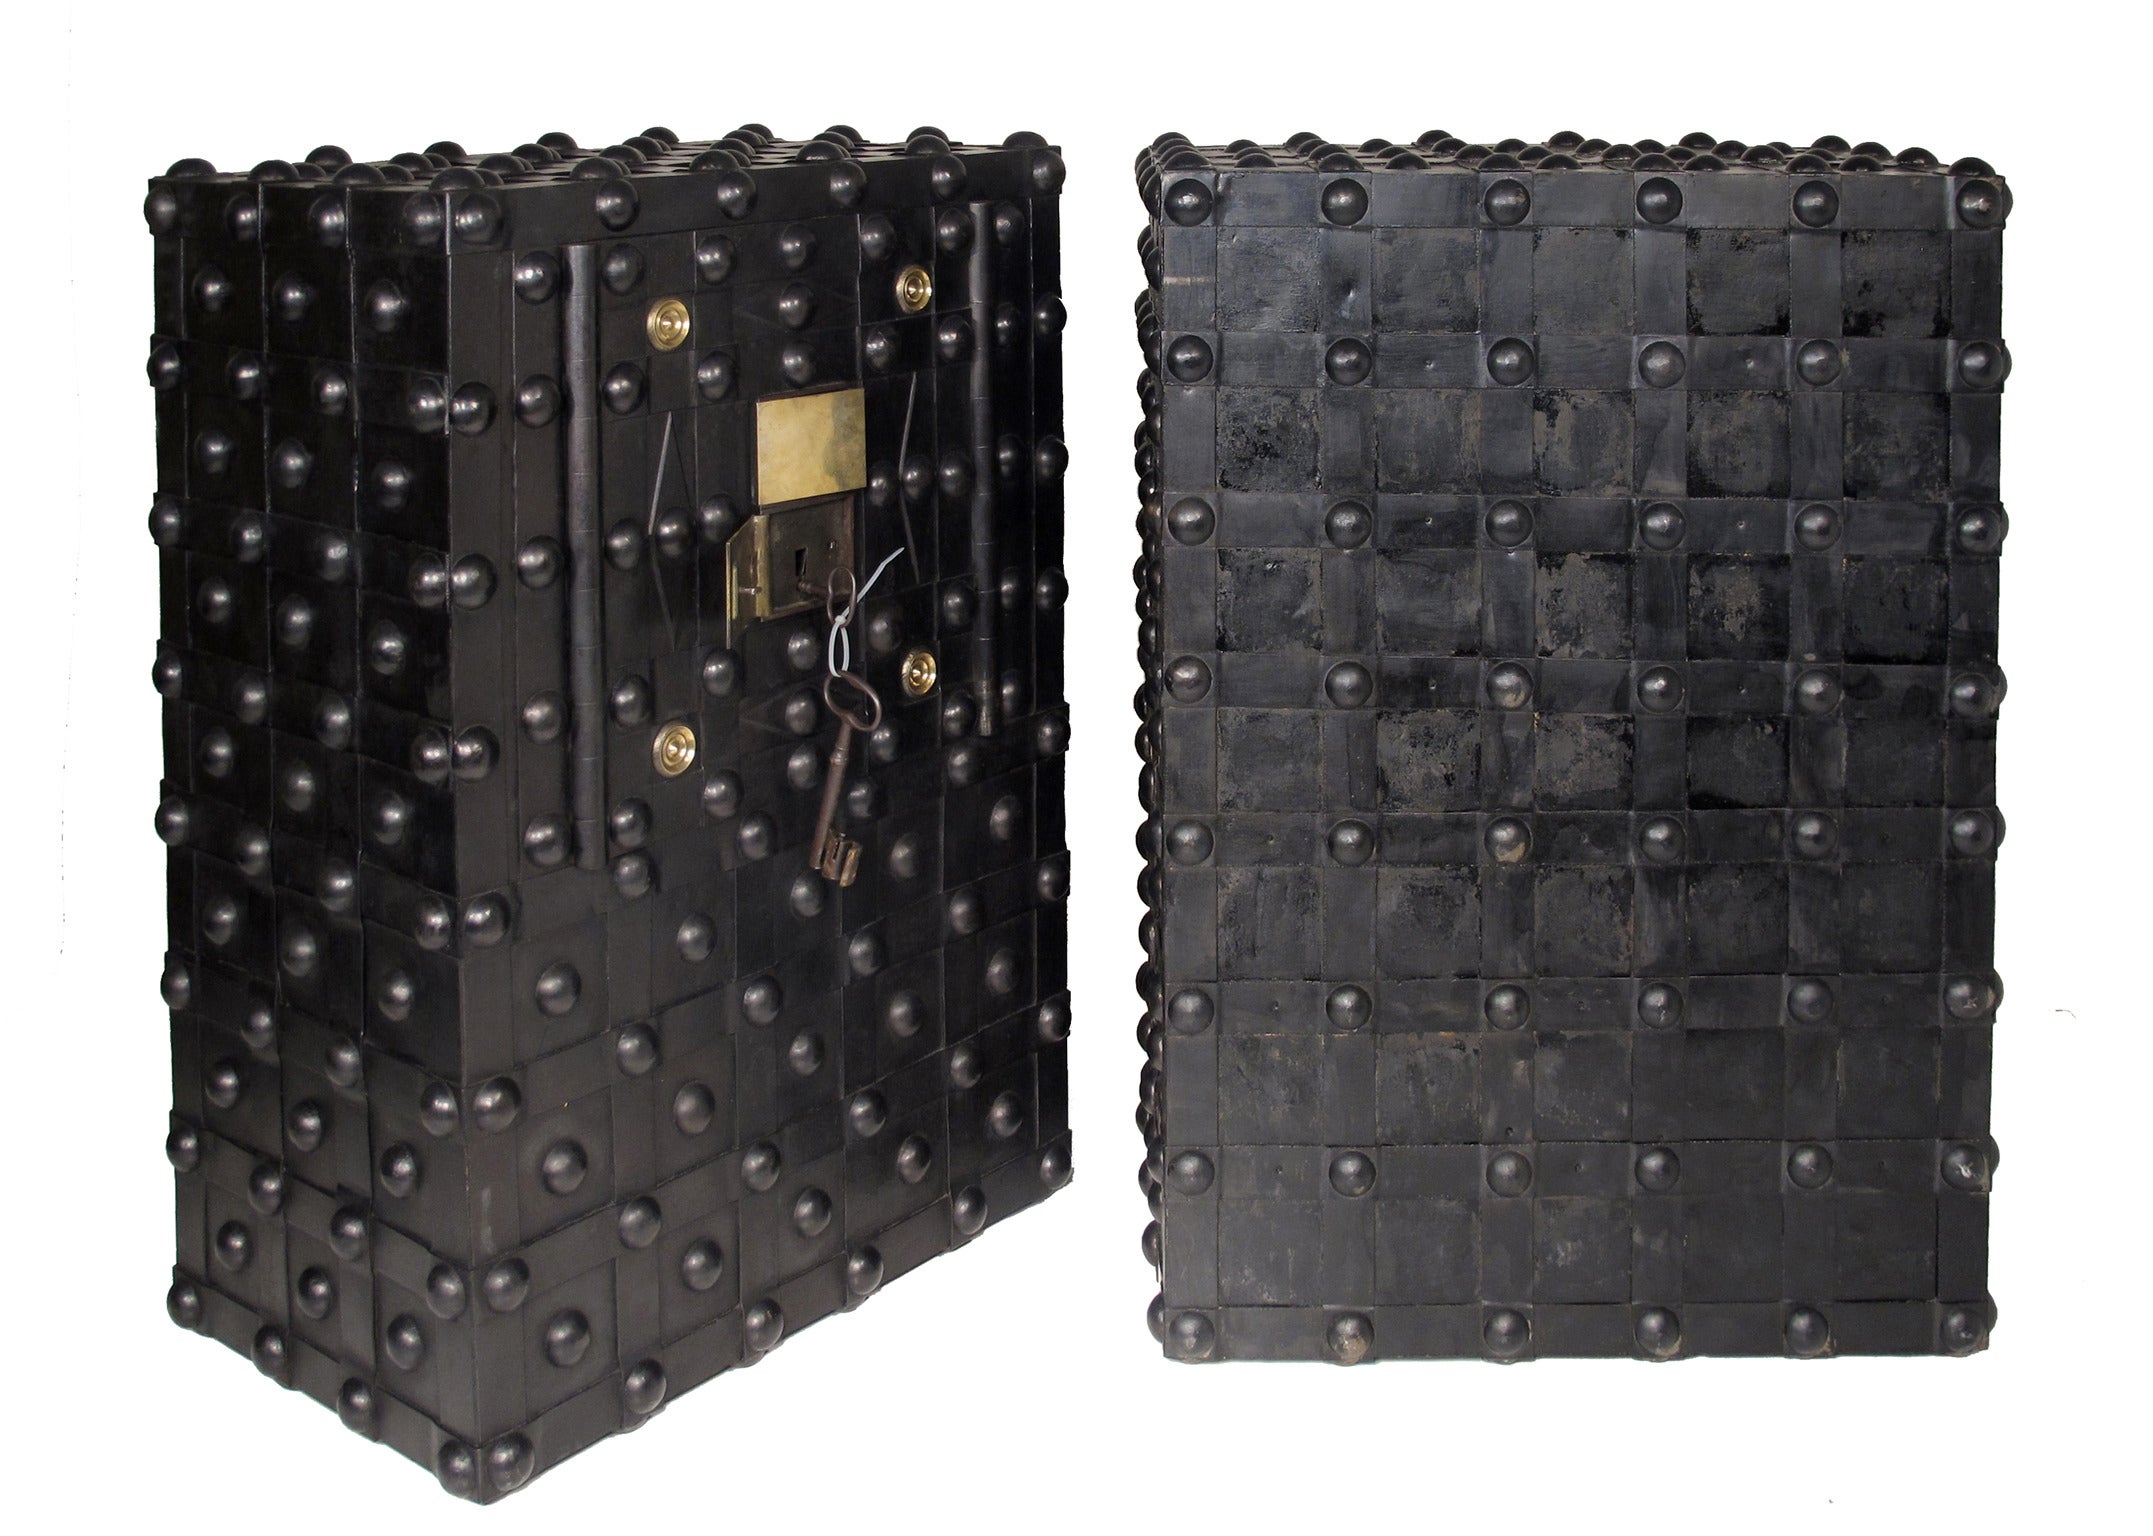 Magnificent Pair of French Charles X Hobnail Safes